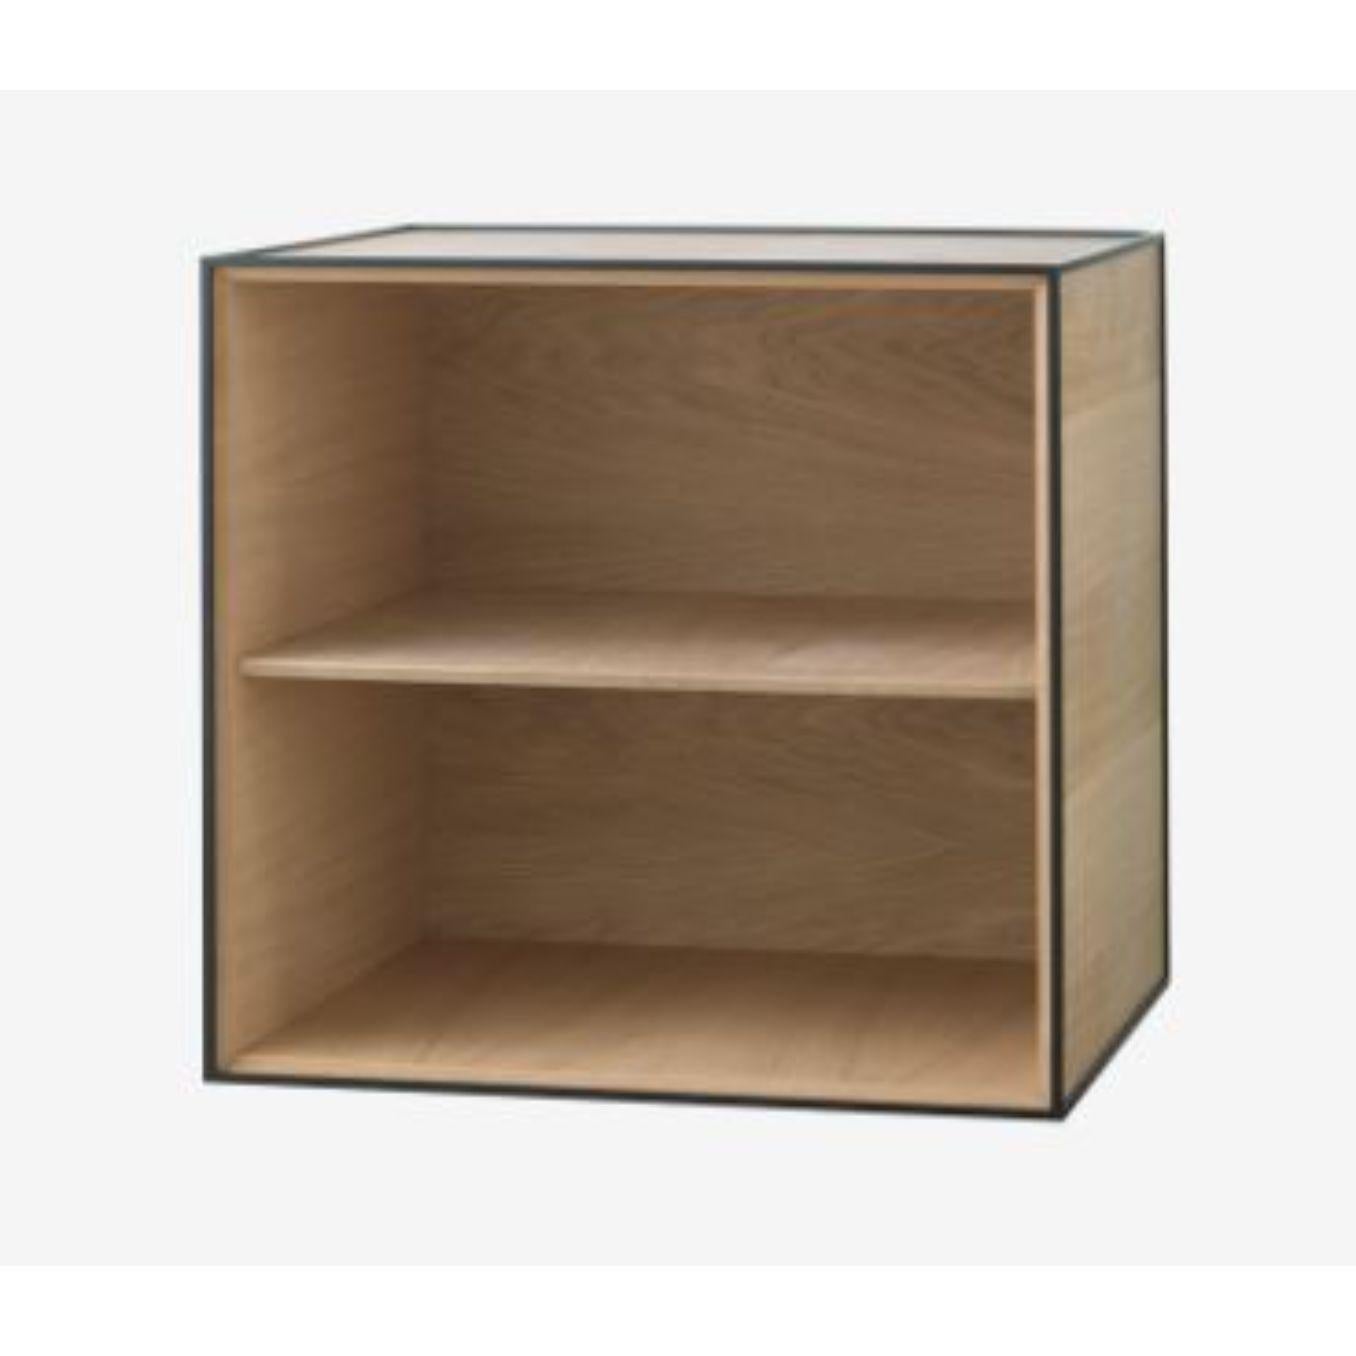 49 Oak frame box with shelf by Lassen.
Dimensions: D 49 x W 42 x H 49 cm.
Materials: finér, melamin, melamin, melamine, metal, veneer, oak
Also available in different colours and dimensions. 
Weight: 14 Kg.


By Lassen is a Danish design